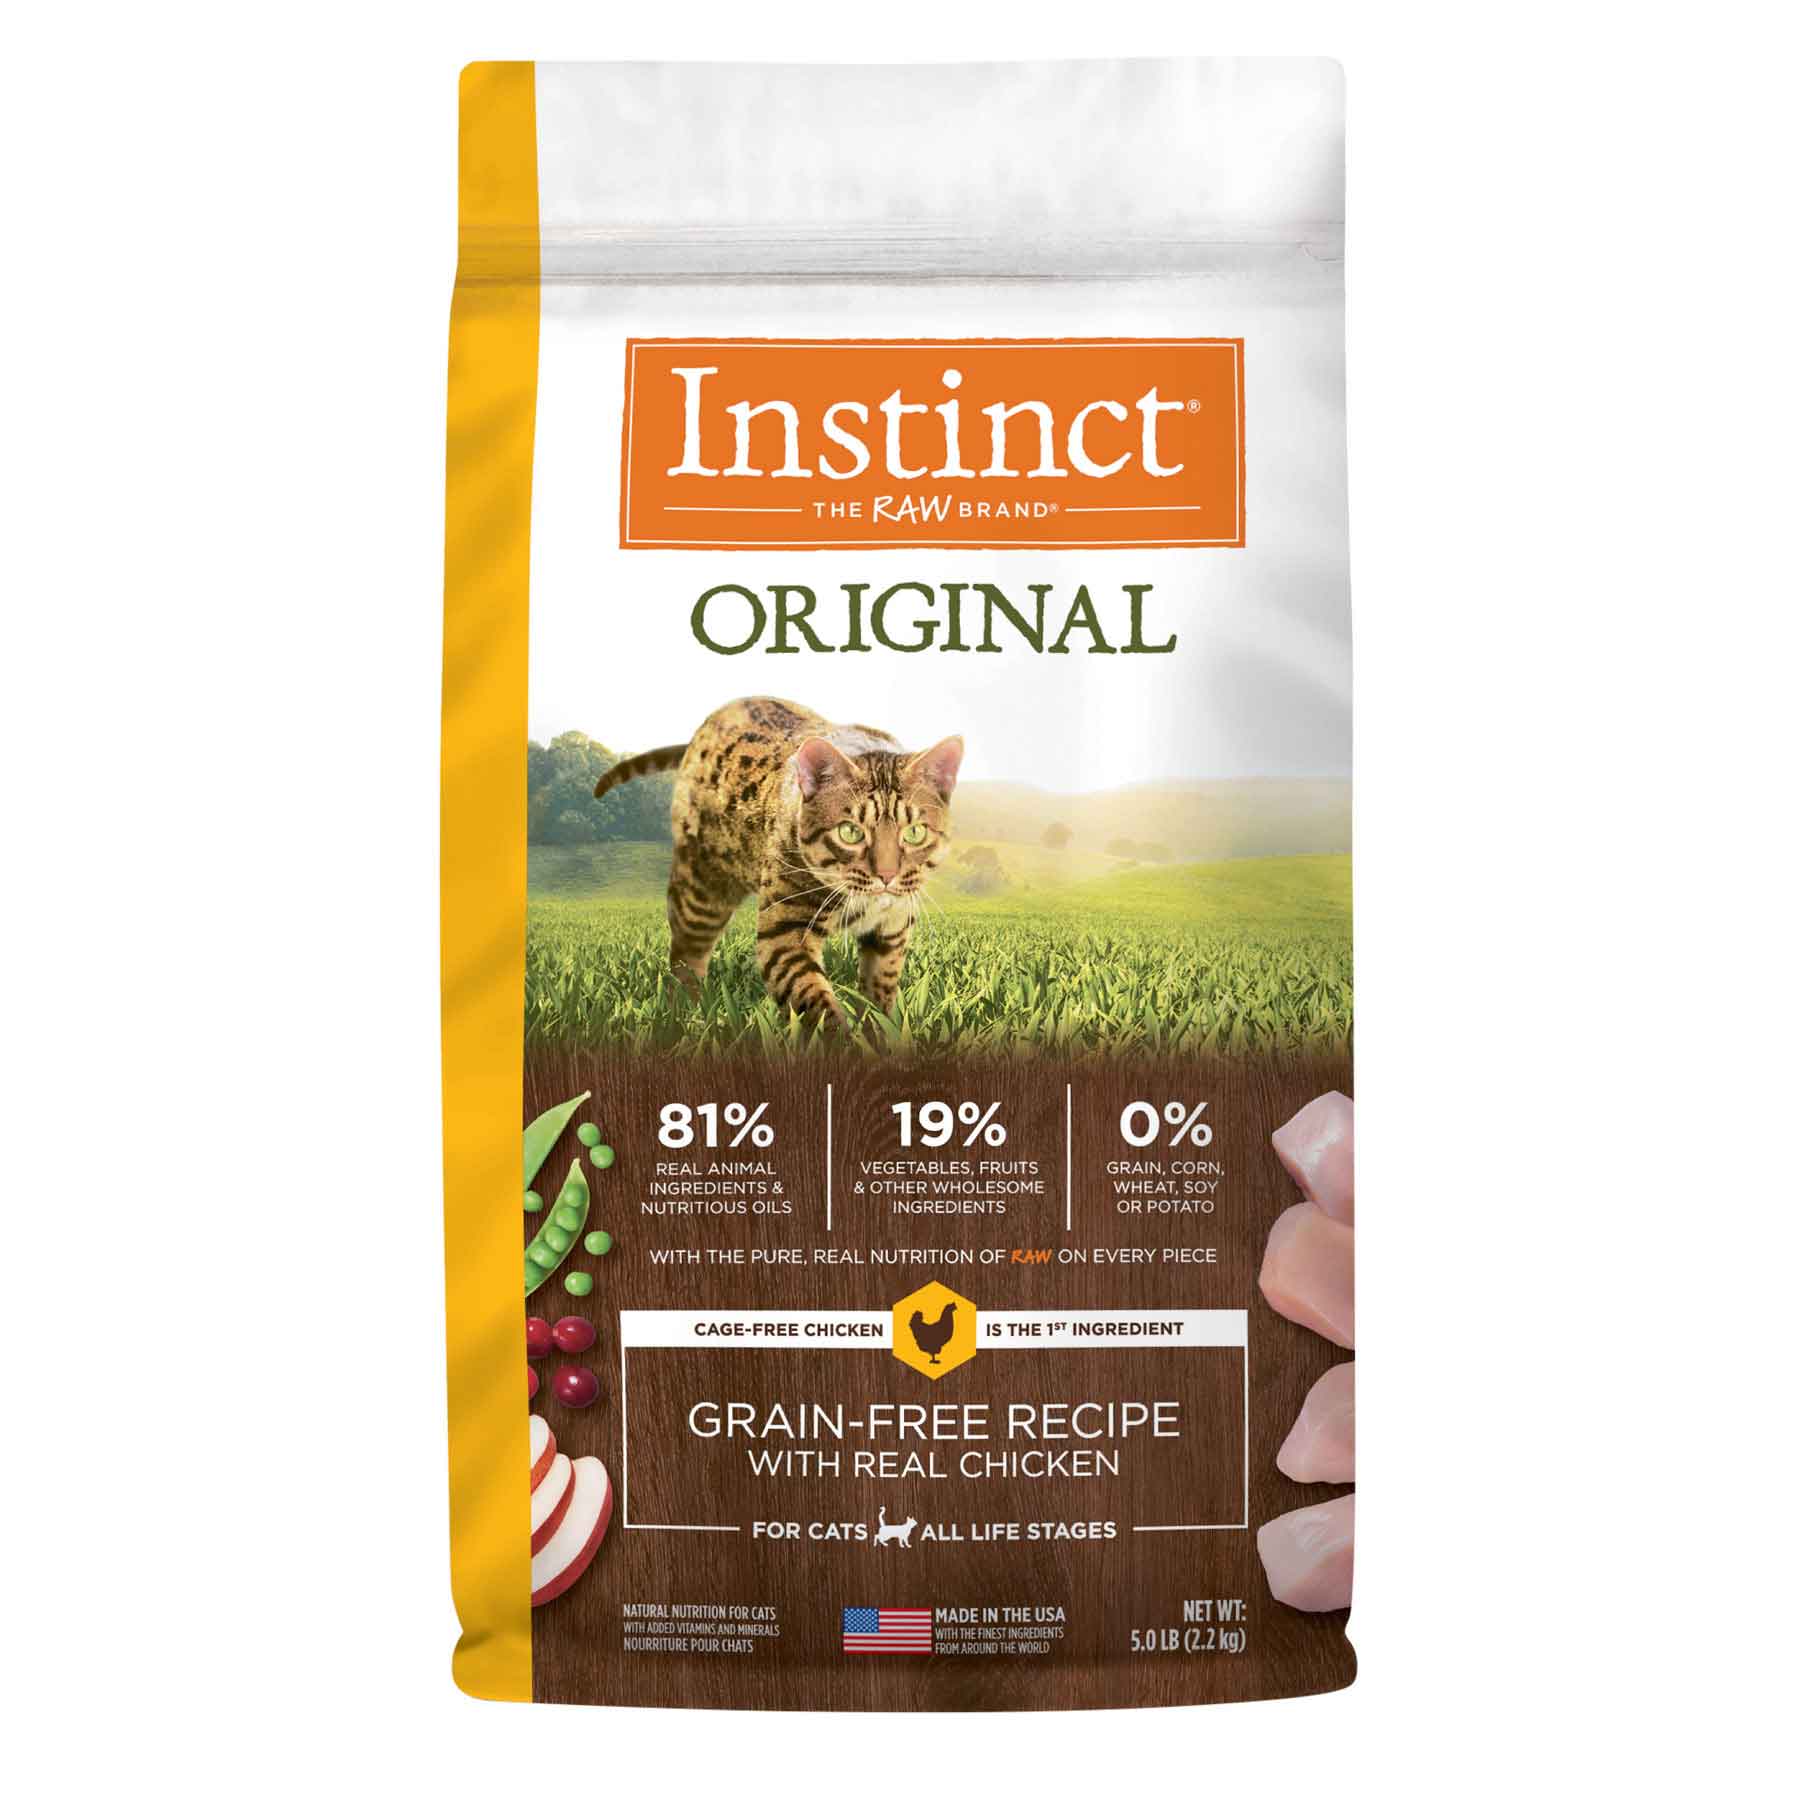 Instinct Original Grain-Free Recipe with Real Chicken Freeze-Dried Raw Coated Dry Cat Food, 5 Pound Bag